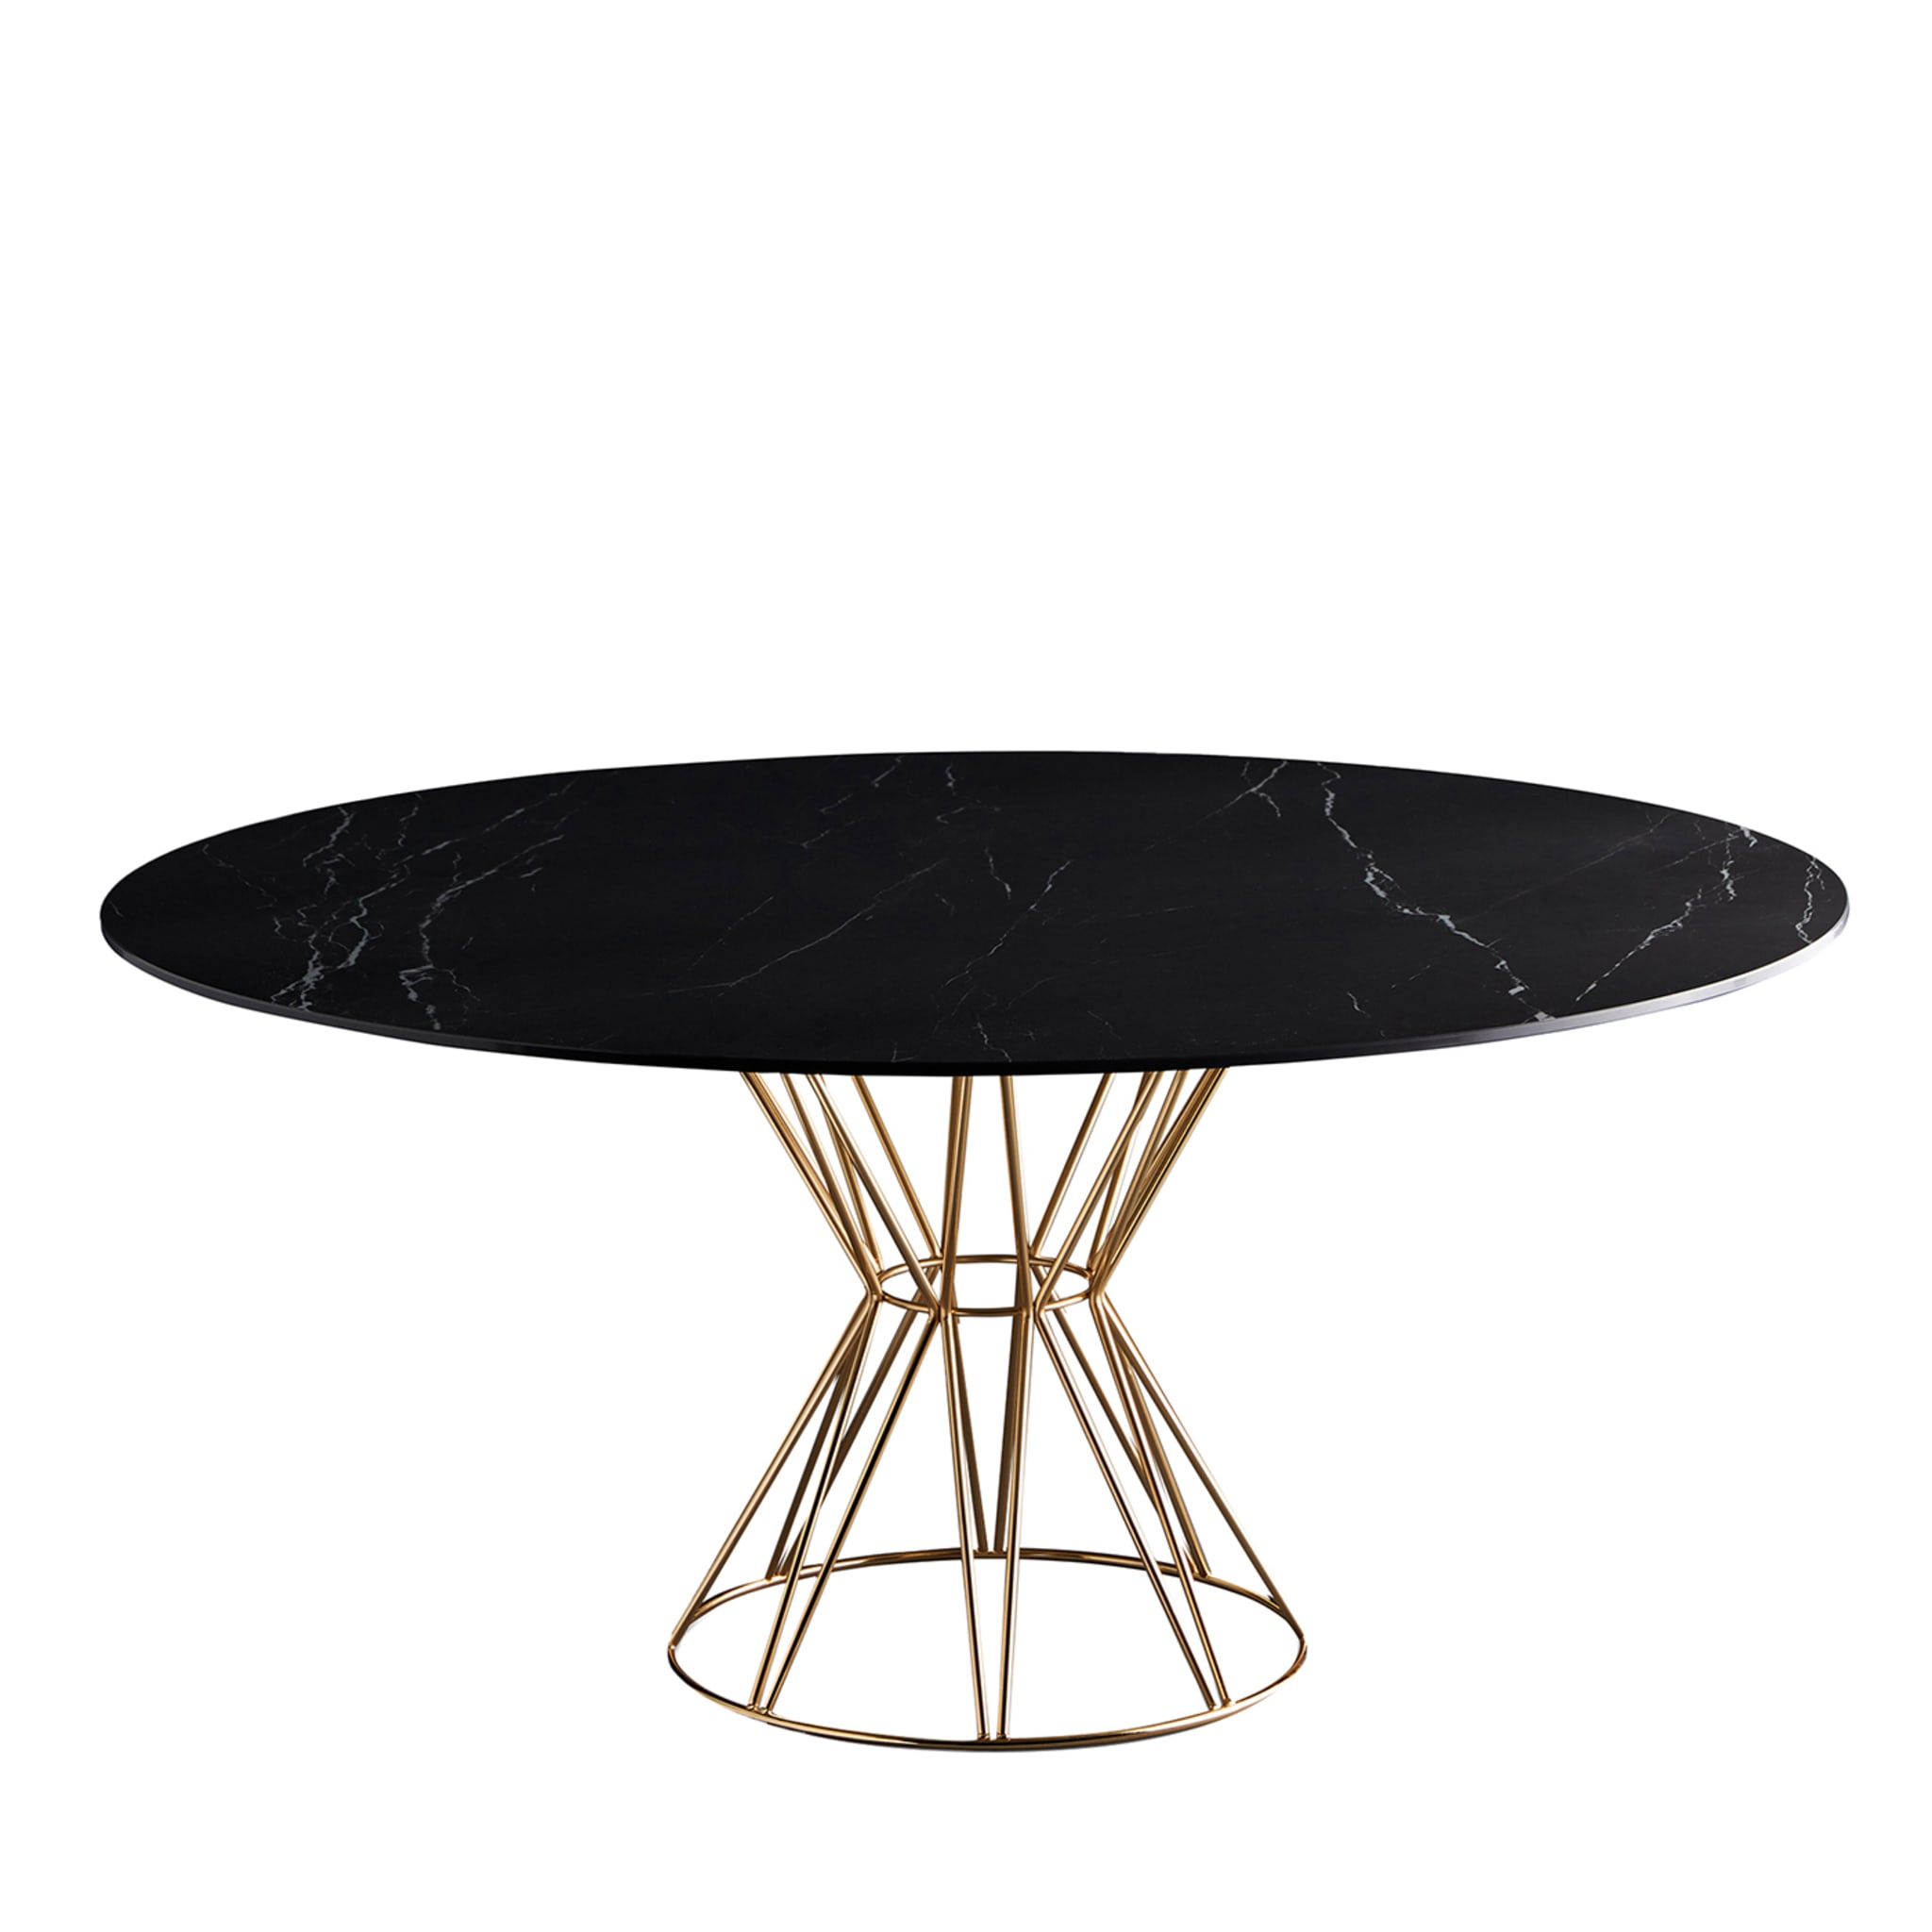 Circus Black Marquina & Brass Table by Fauciglietti Engineering - Main view